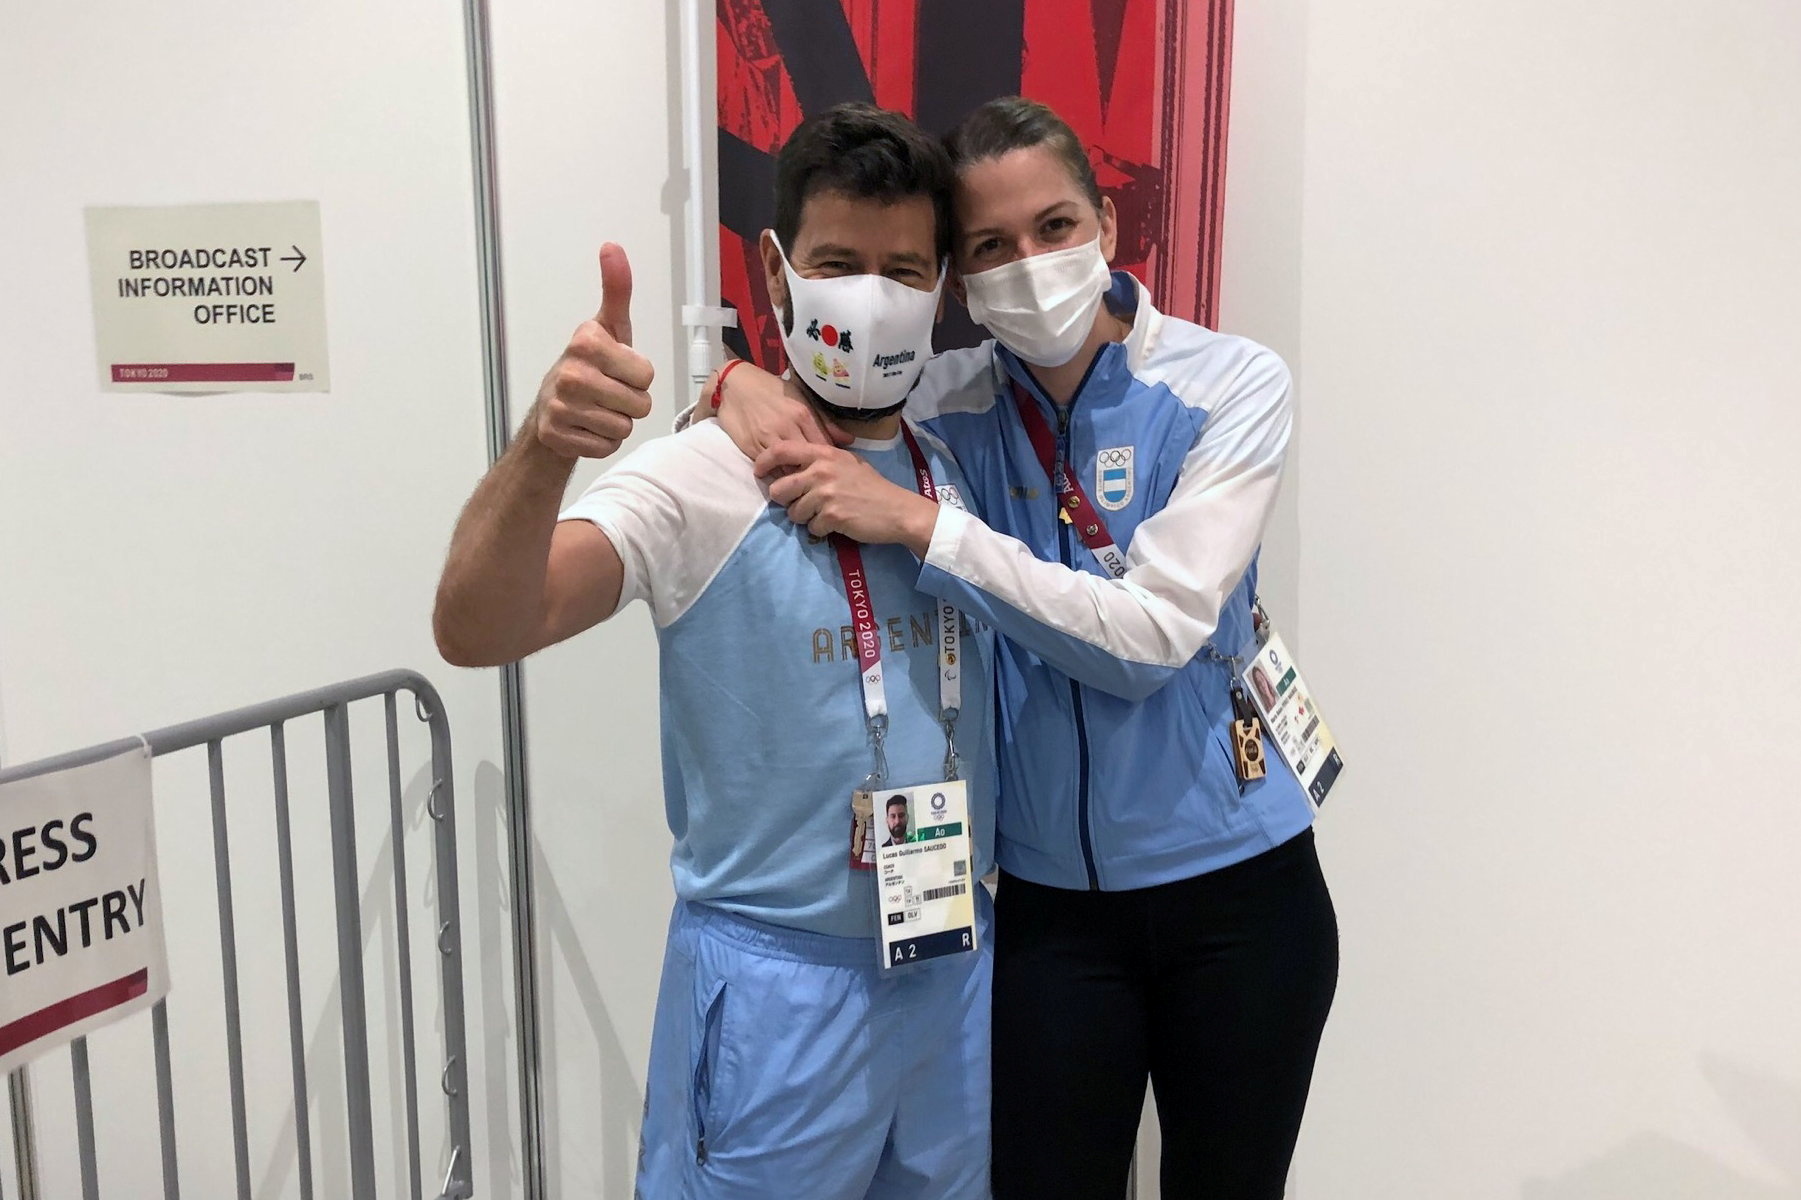 Argentine fencer Maria Belen Perez Maurice hugs her coach of 17 years, Lucas Guillermo Saucedo, after he proposed marriage to her on the sidelines of the Olympic fencing at Makuhari Messe Hall in Chiba, Japan July 26, 2021.